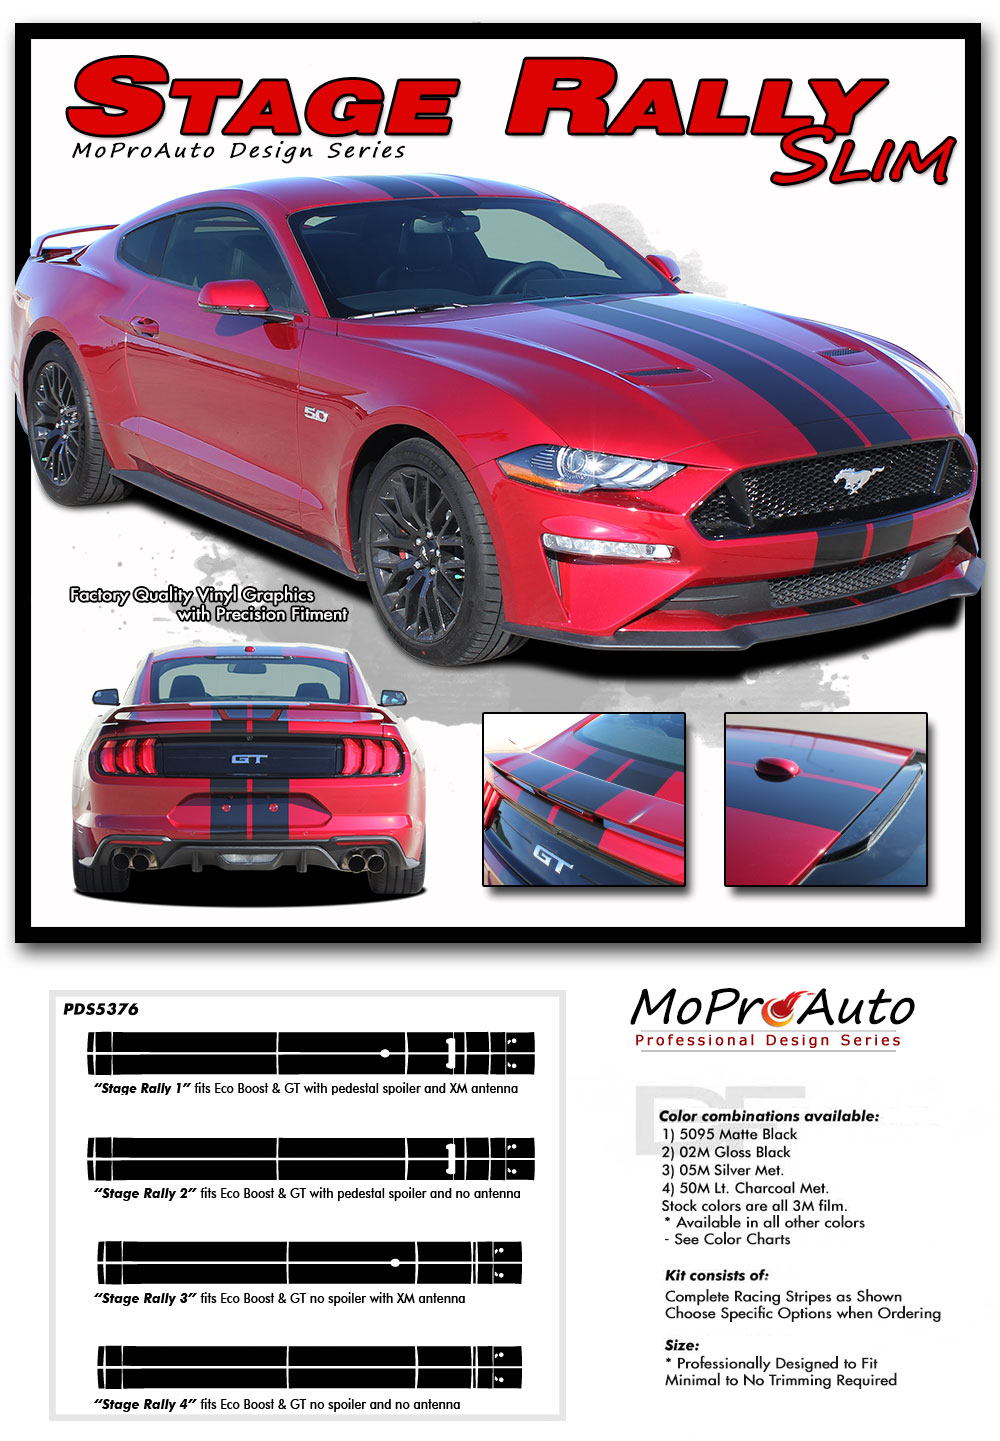 2018 2019 2020 2021 2022 STAGE RALLY SLIM OEM Style Racing Stripes for Ford Mustang - MoProAuto Pro Design Series Vinyl Graphics, Stripes and Decals Kit